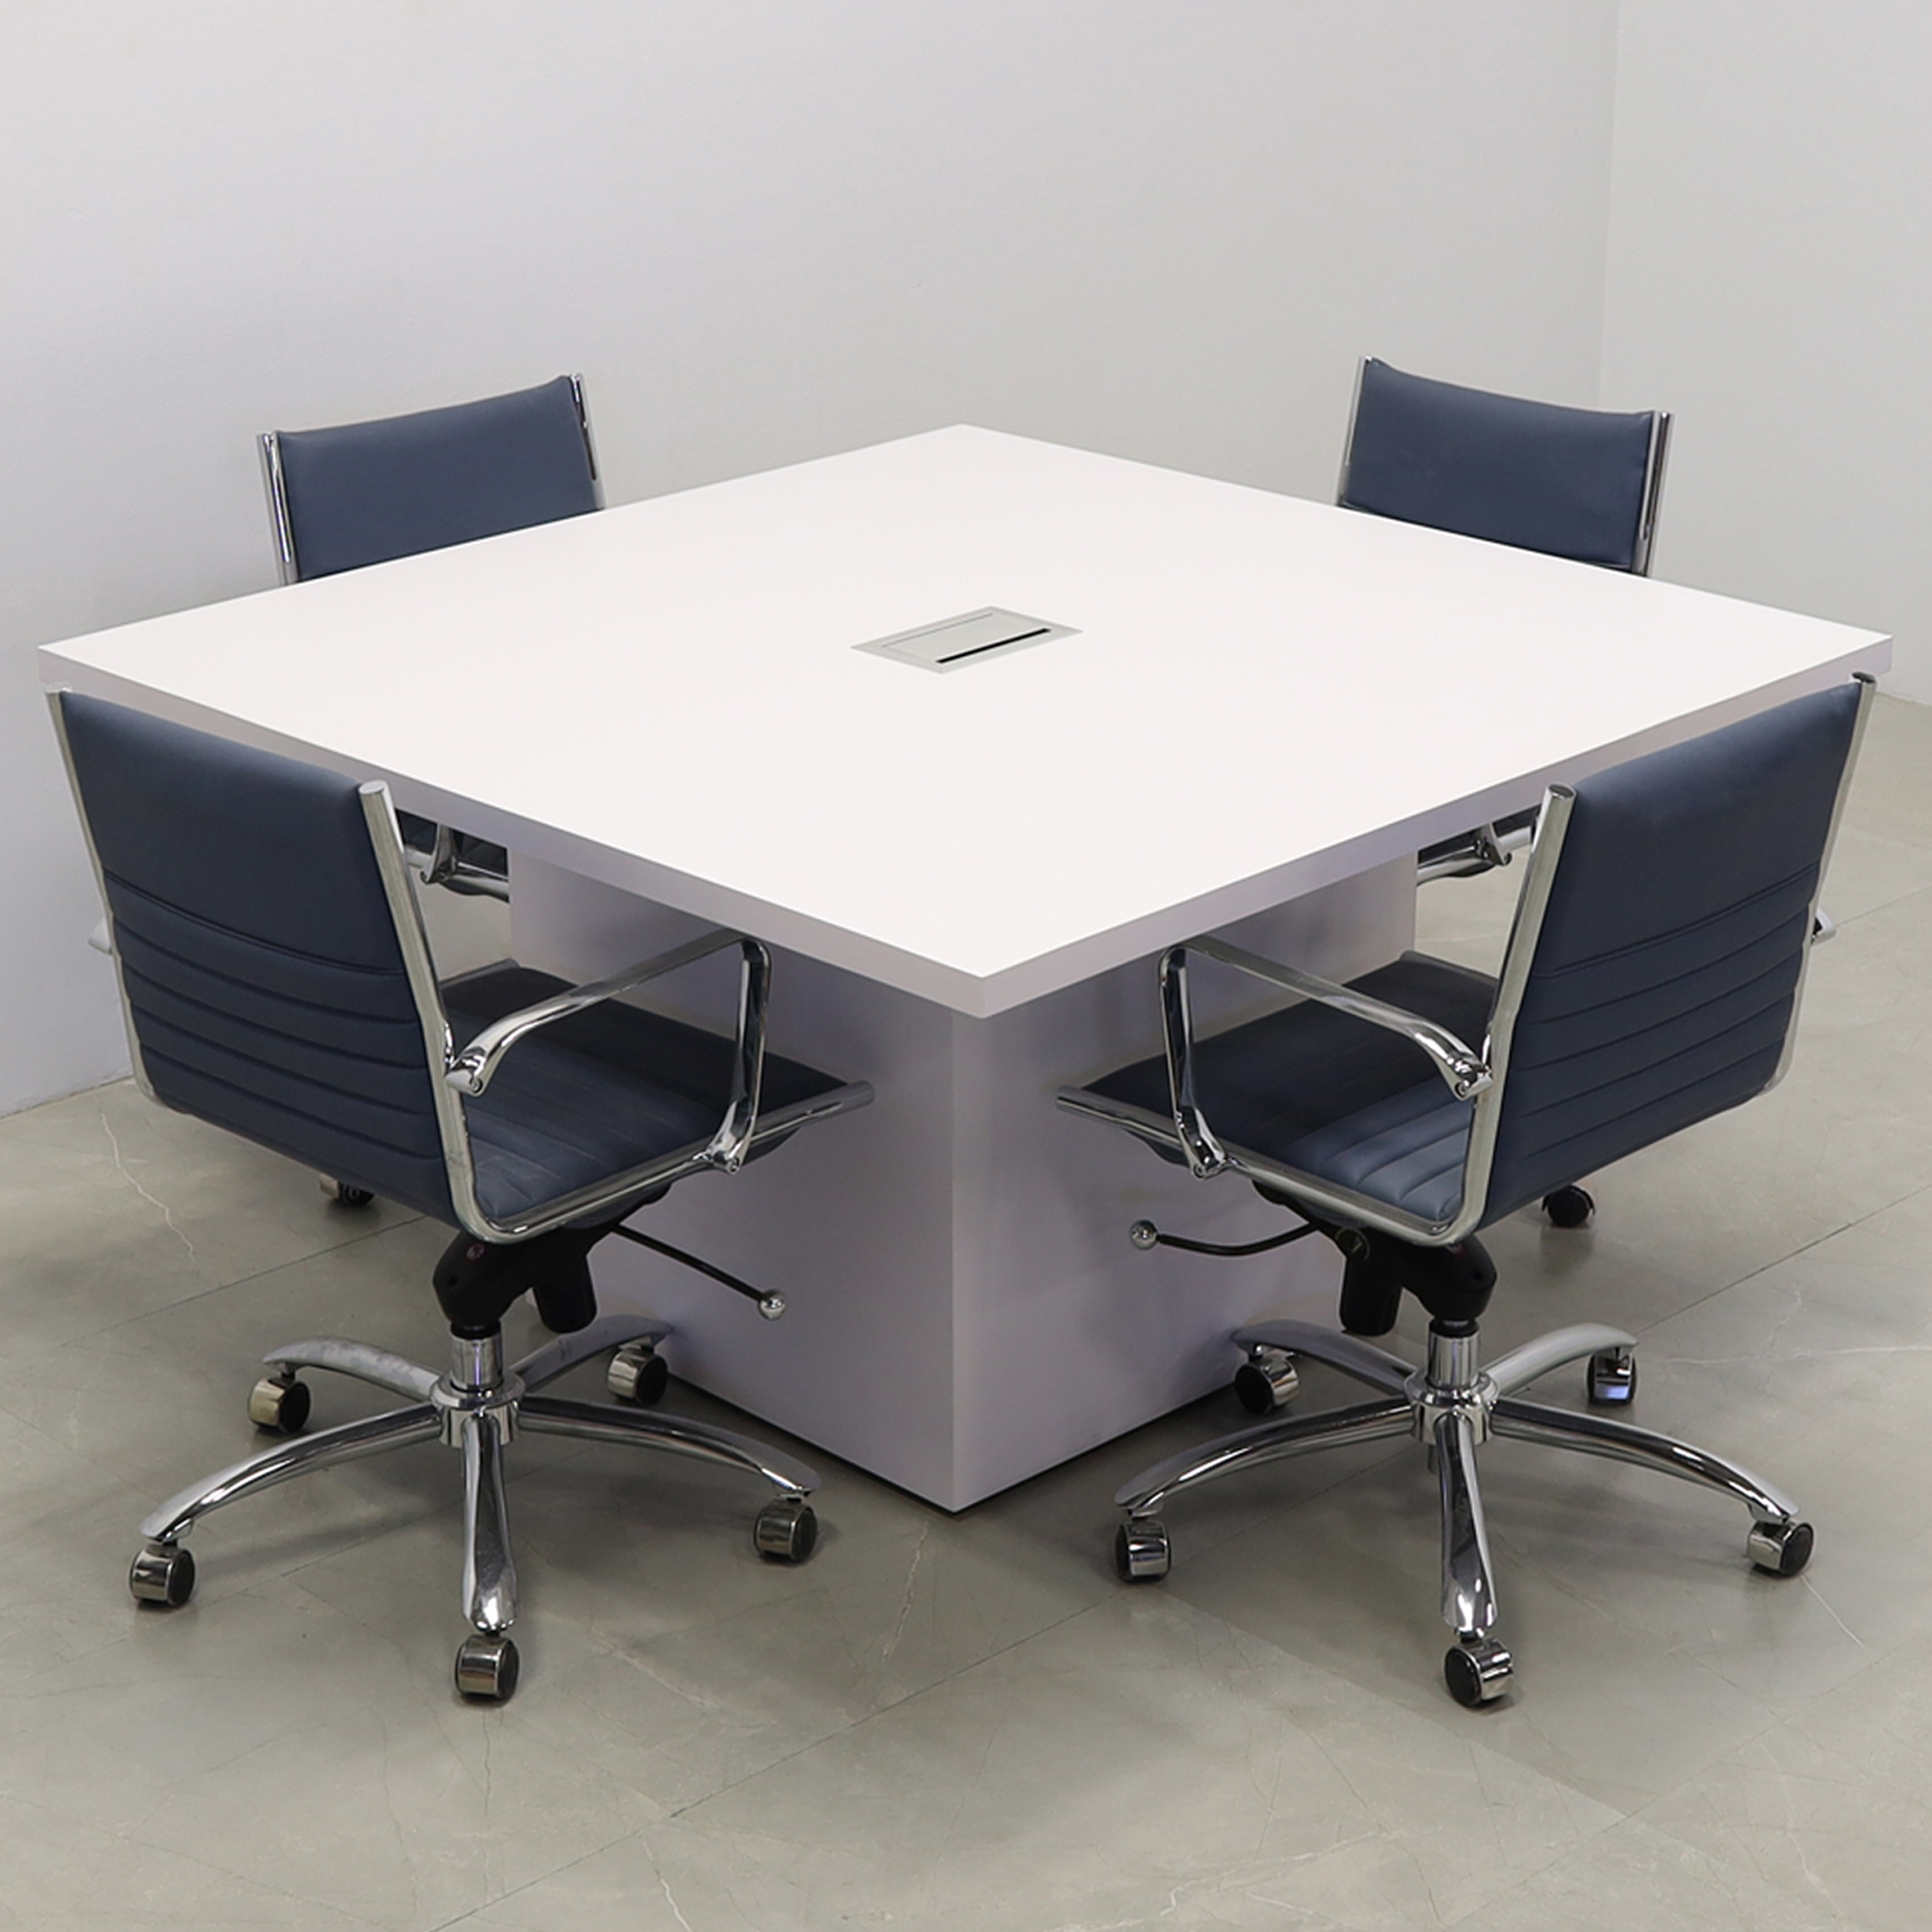 54-inch Newton Square Conference Table With Laminate Top in white matte laminate top and base, with silver MX3 powerbox, shown here.